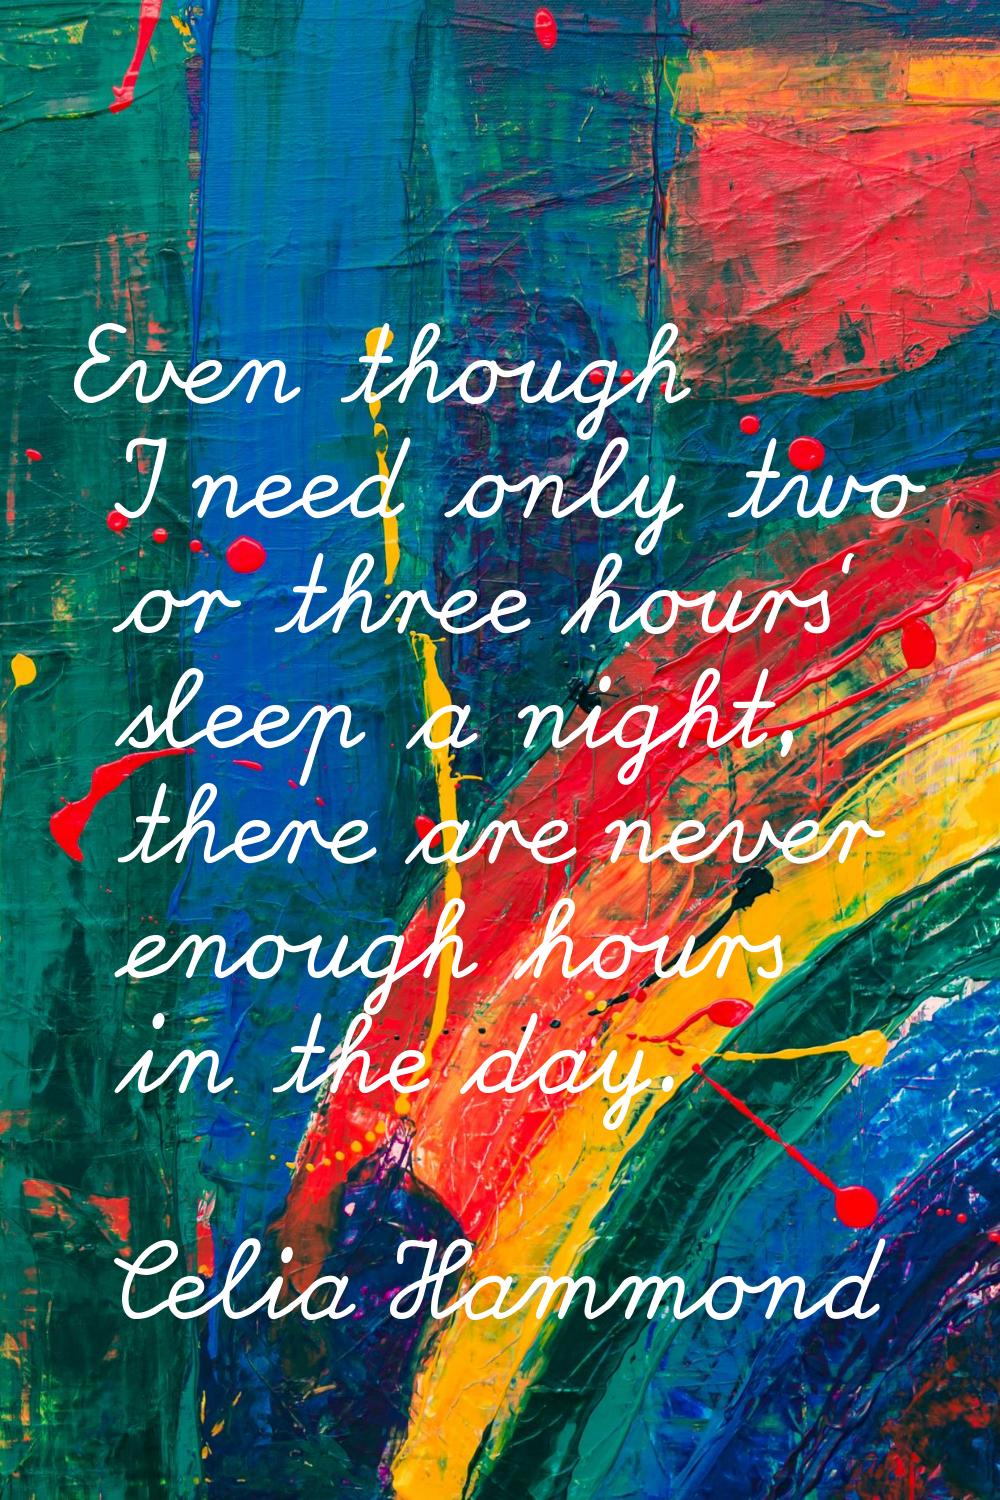 Even though I need only two or three hours' sleep a night, there are never enough hours in the day.